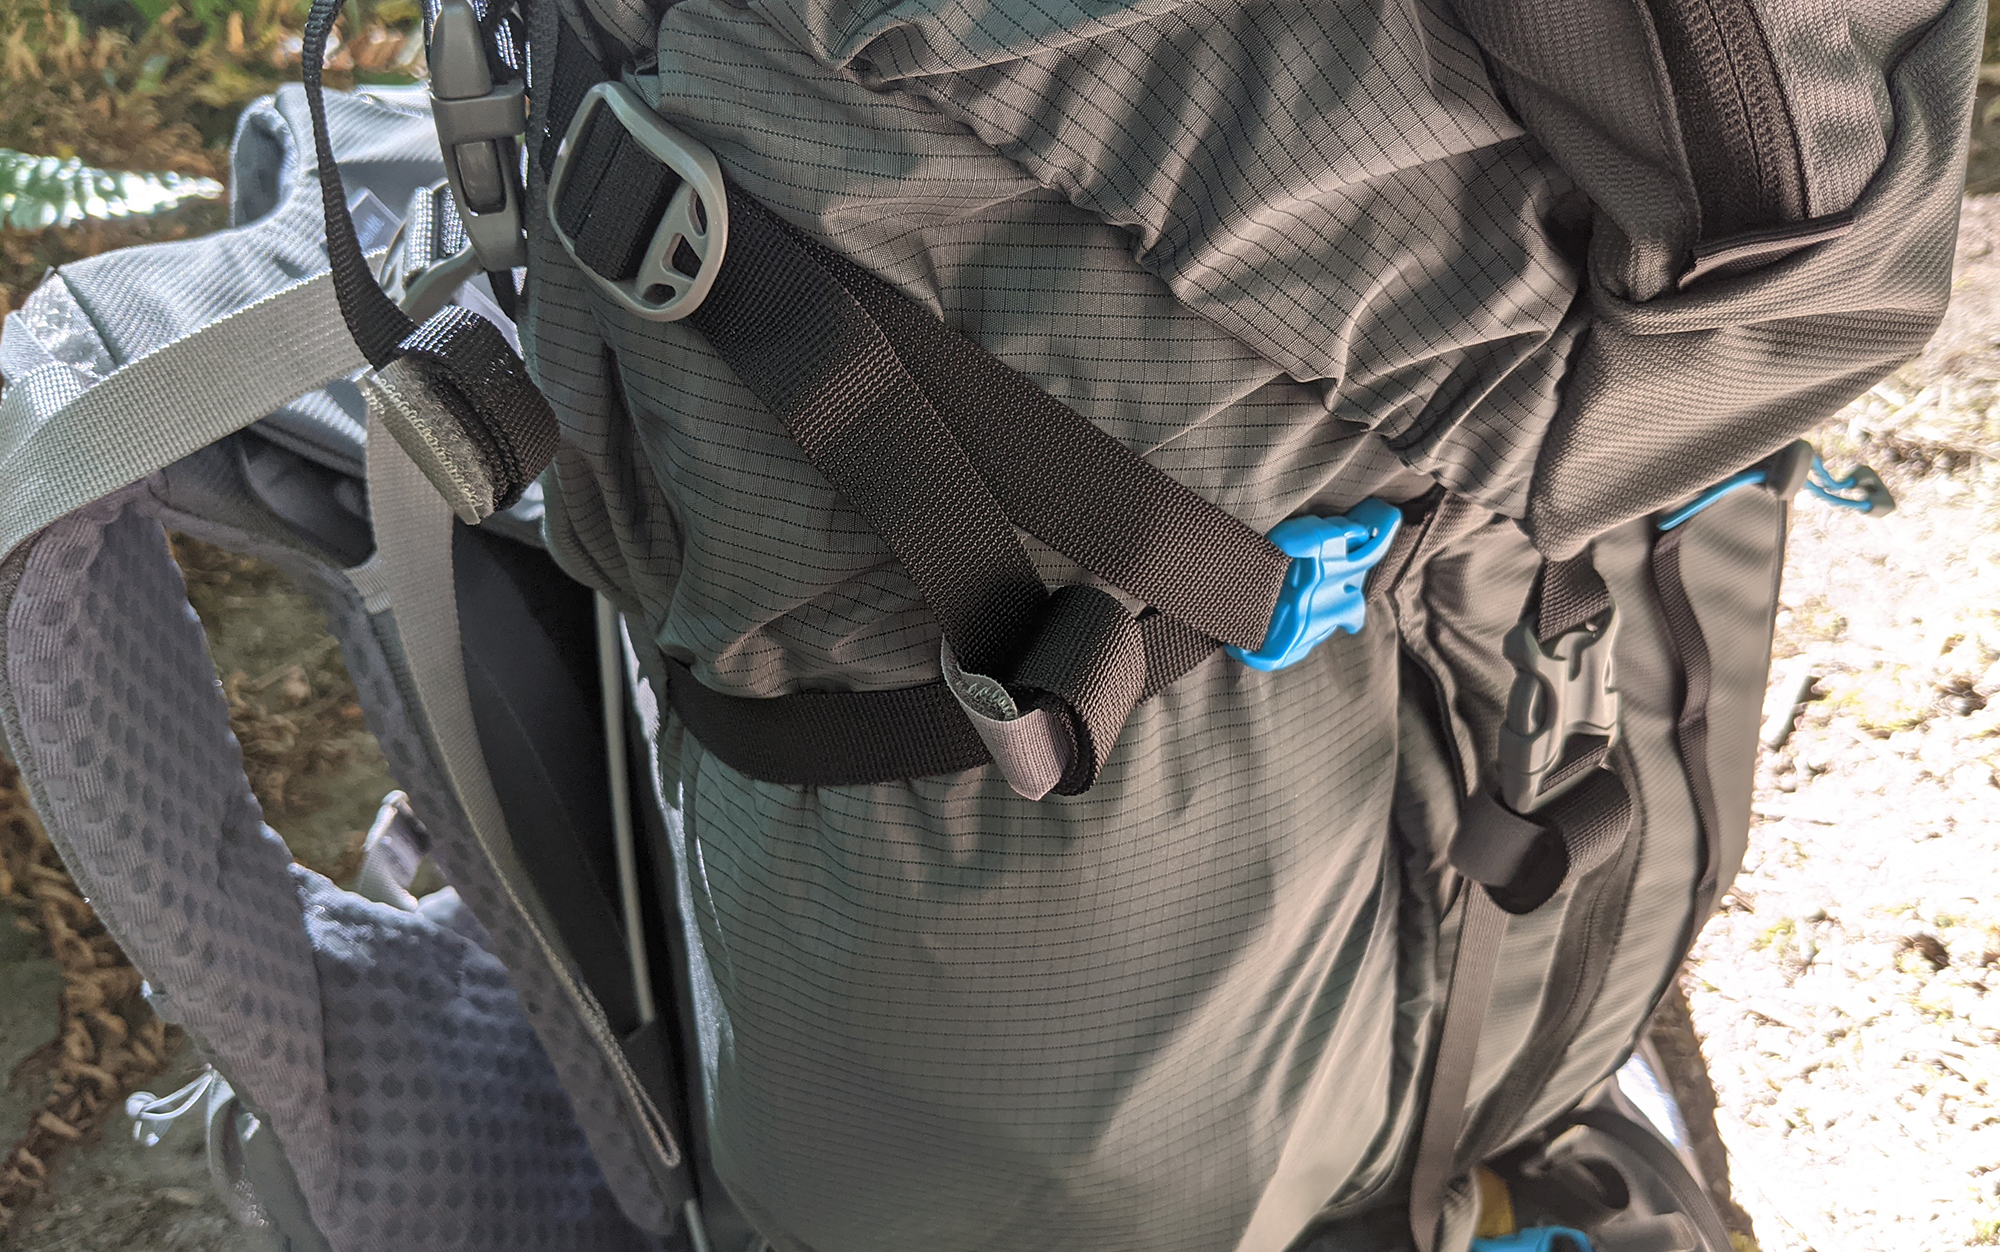 The Velcro strap holders were included on almost all of the nylon webbing pieces on the Mystery Ranch Bridger 65, creating a more streamlined appearance than is typical.